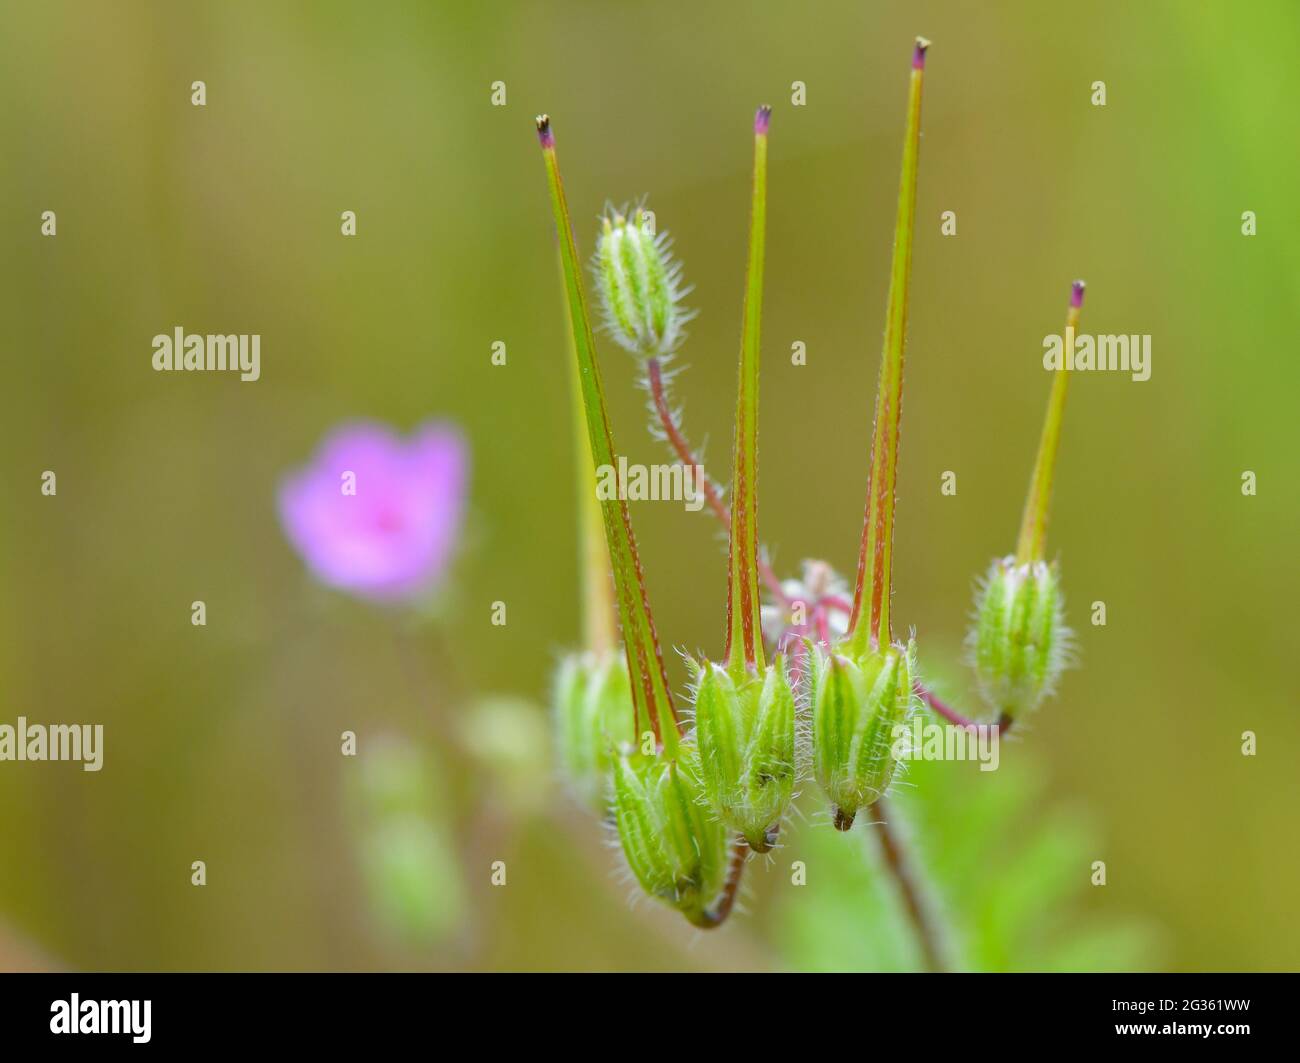 Sieversdorf, Germany. 13th June, 2021. The fruits with the strongly elongated pistil of the common heron's beak (Erodium cicutarium), which is also called hemlock-leaved heron's beak. The plant belongs to the genus Cranesbill within the cranesbill family (Geraniaceae). Credit: Patrick Pleul/dpa-Zentralbild/ZB/dpa/Alamy Live News Stock Photo